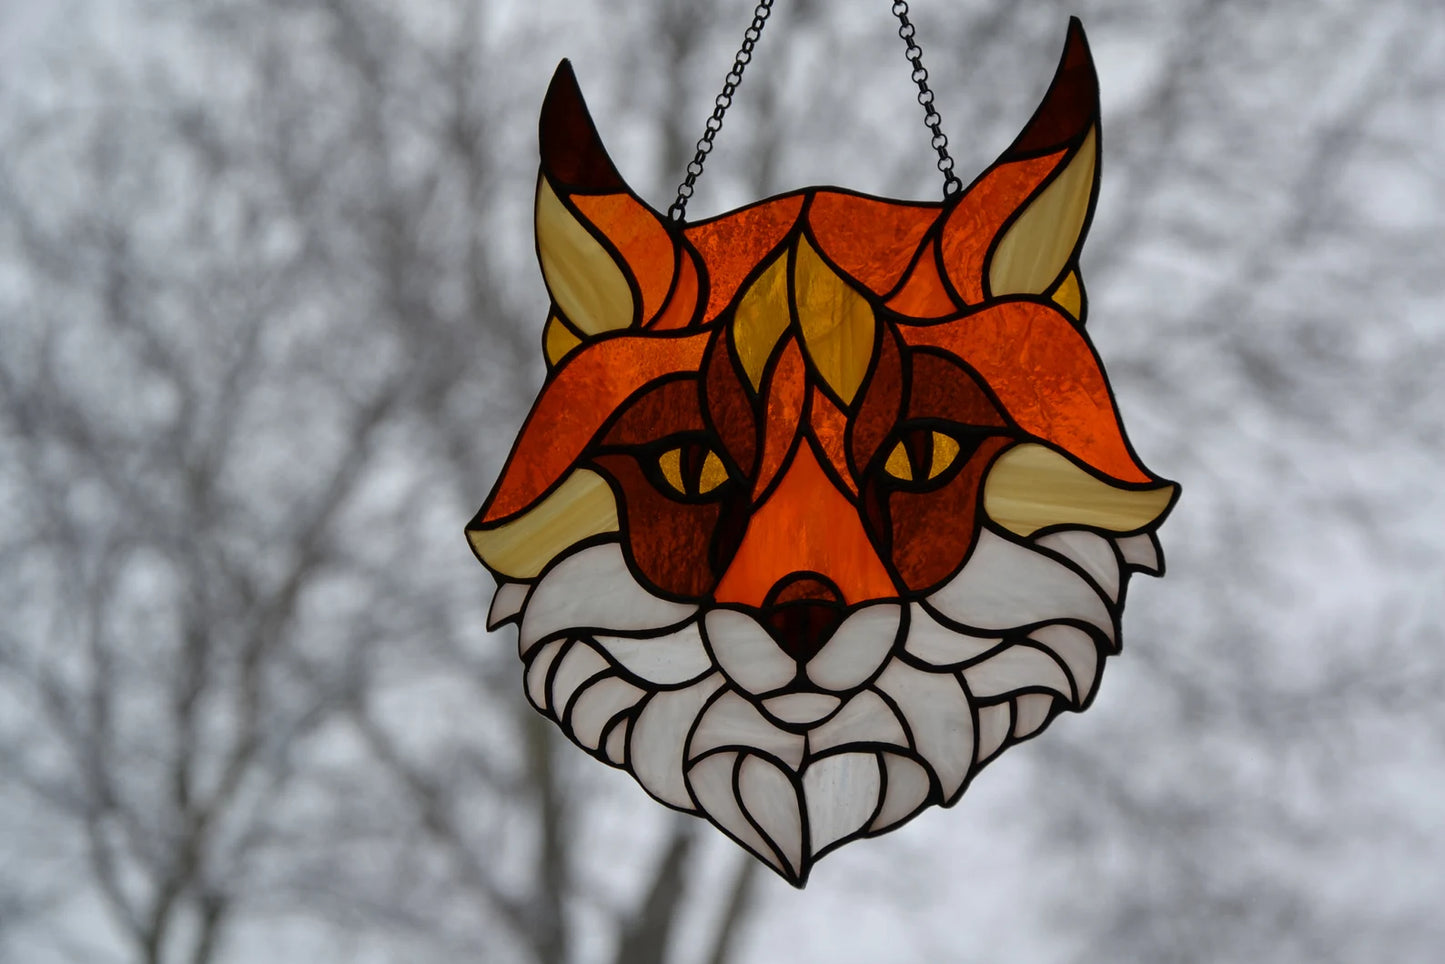 Stain glass suncatcher Fox Stained glass window hanging Glass animals Art decor Mother's day gift Wall decor Window pendant Christmas gift